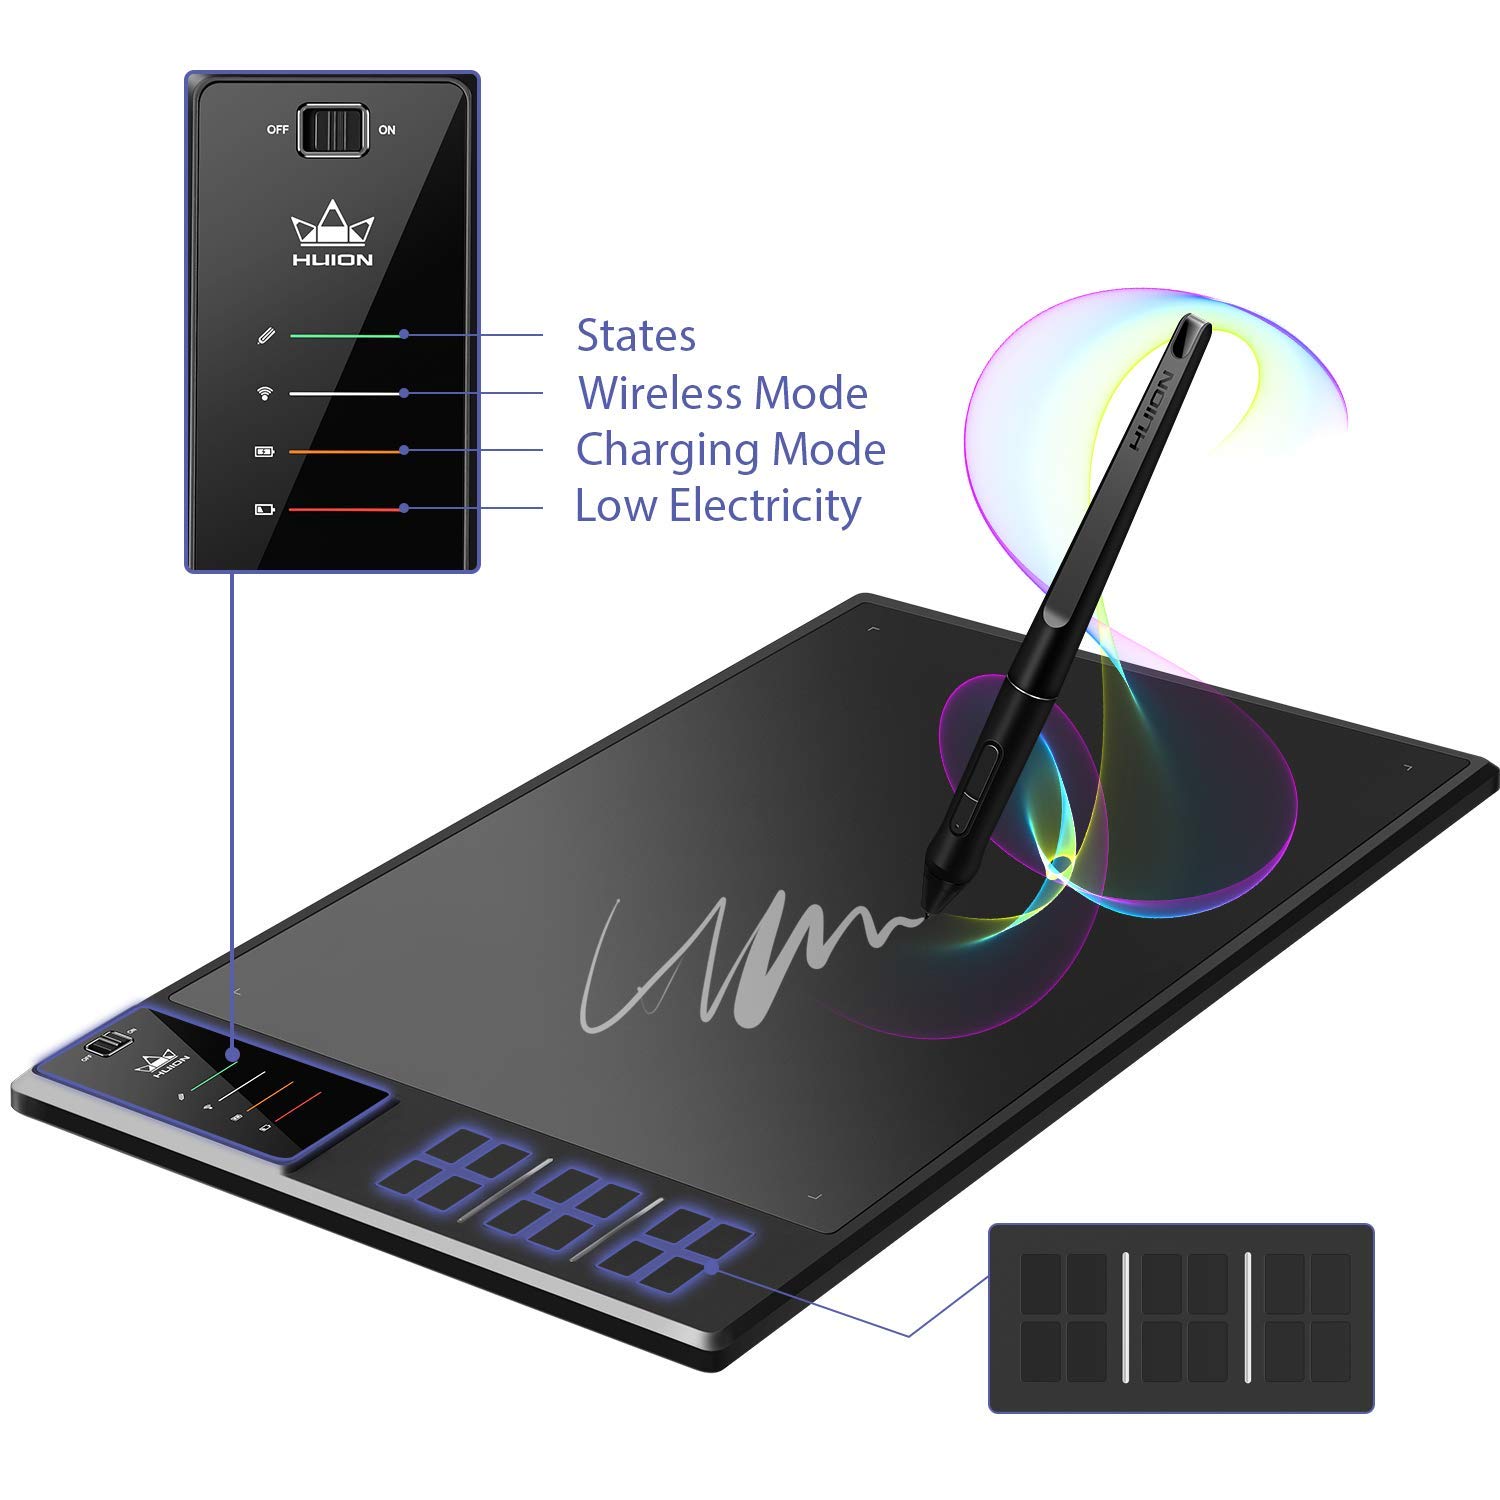 HUION WH1409 V2 graphic tablet